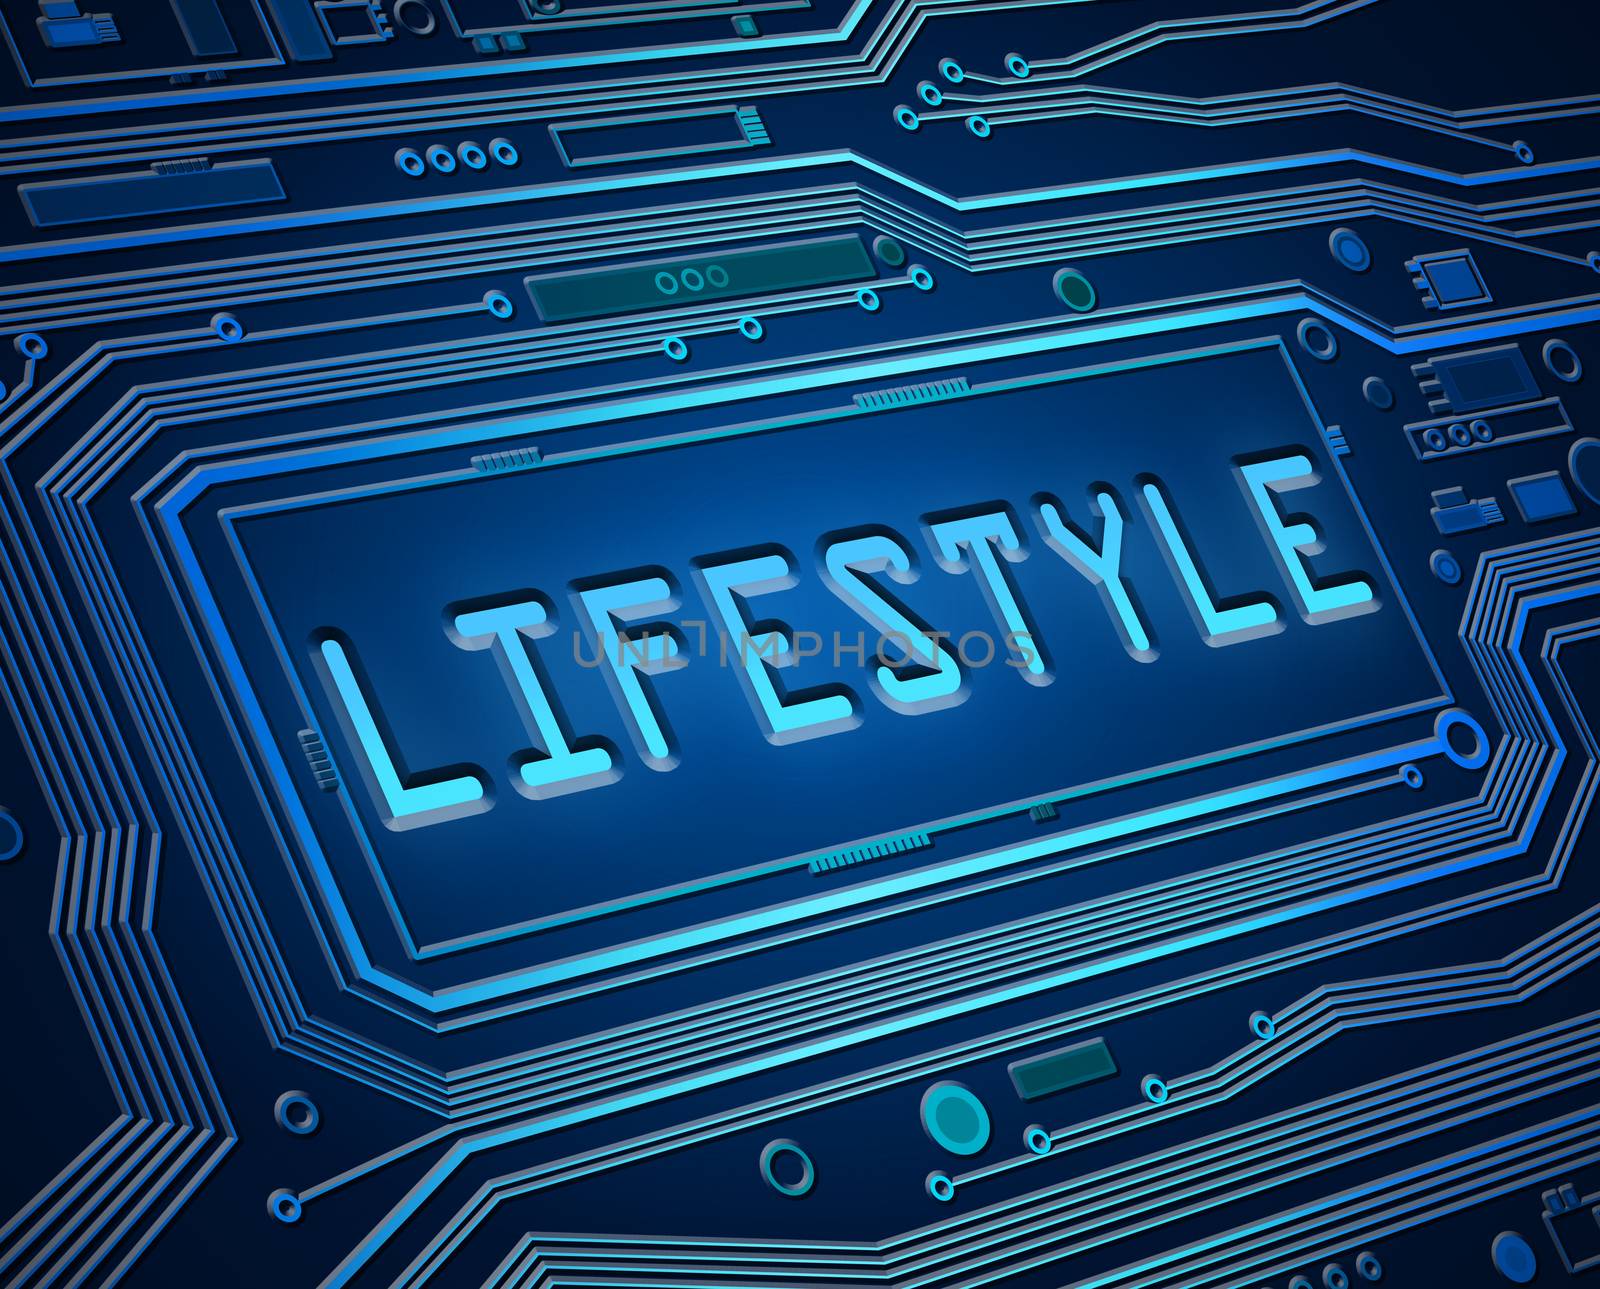 Abstract style illustration depicting printed circuit board components with a lifestyle concept.